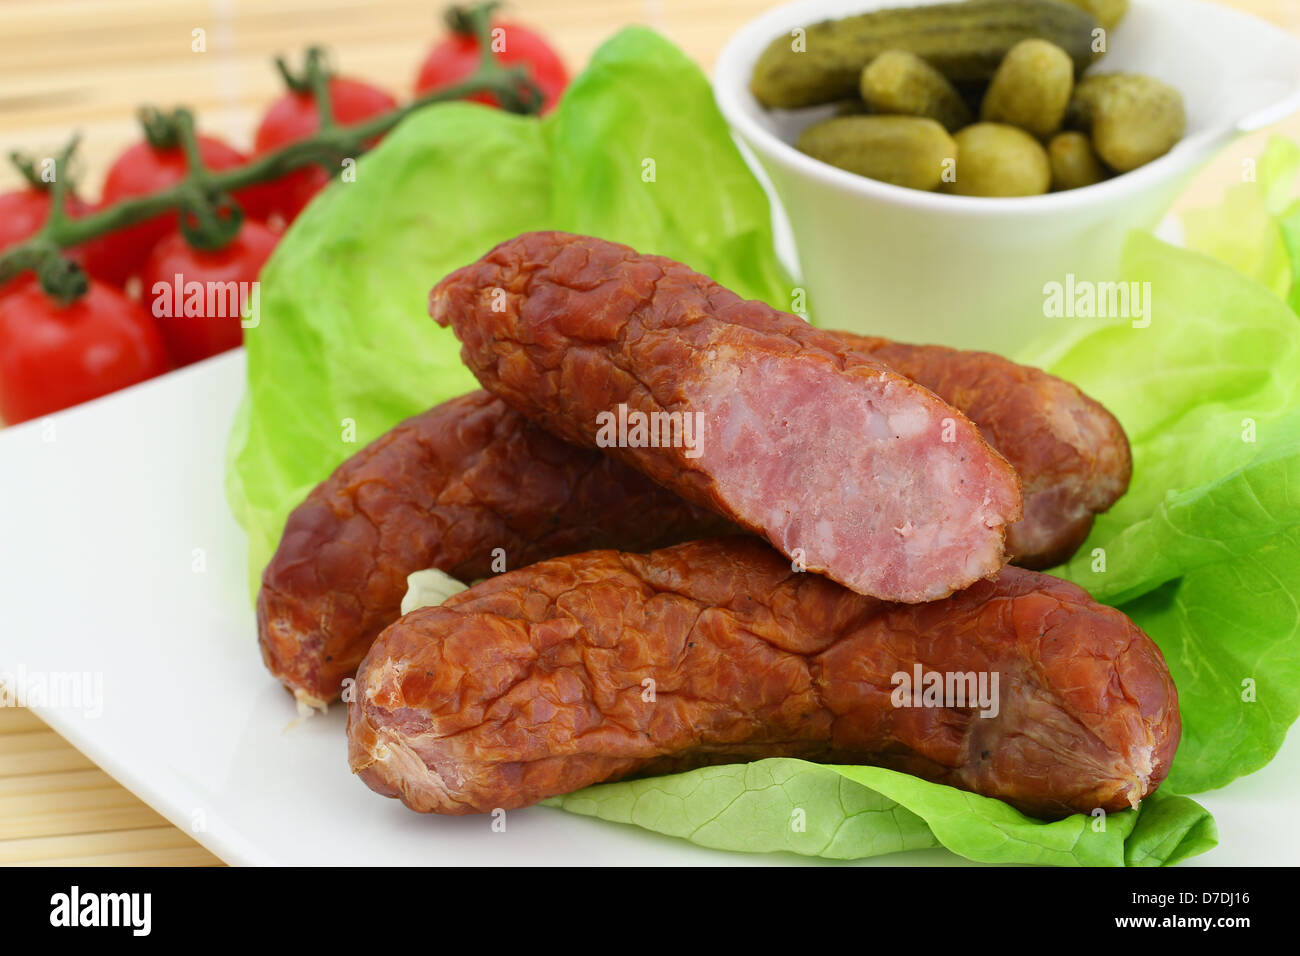 Traditional Polish smoked sausage on lettuce leaves Stock Photo